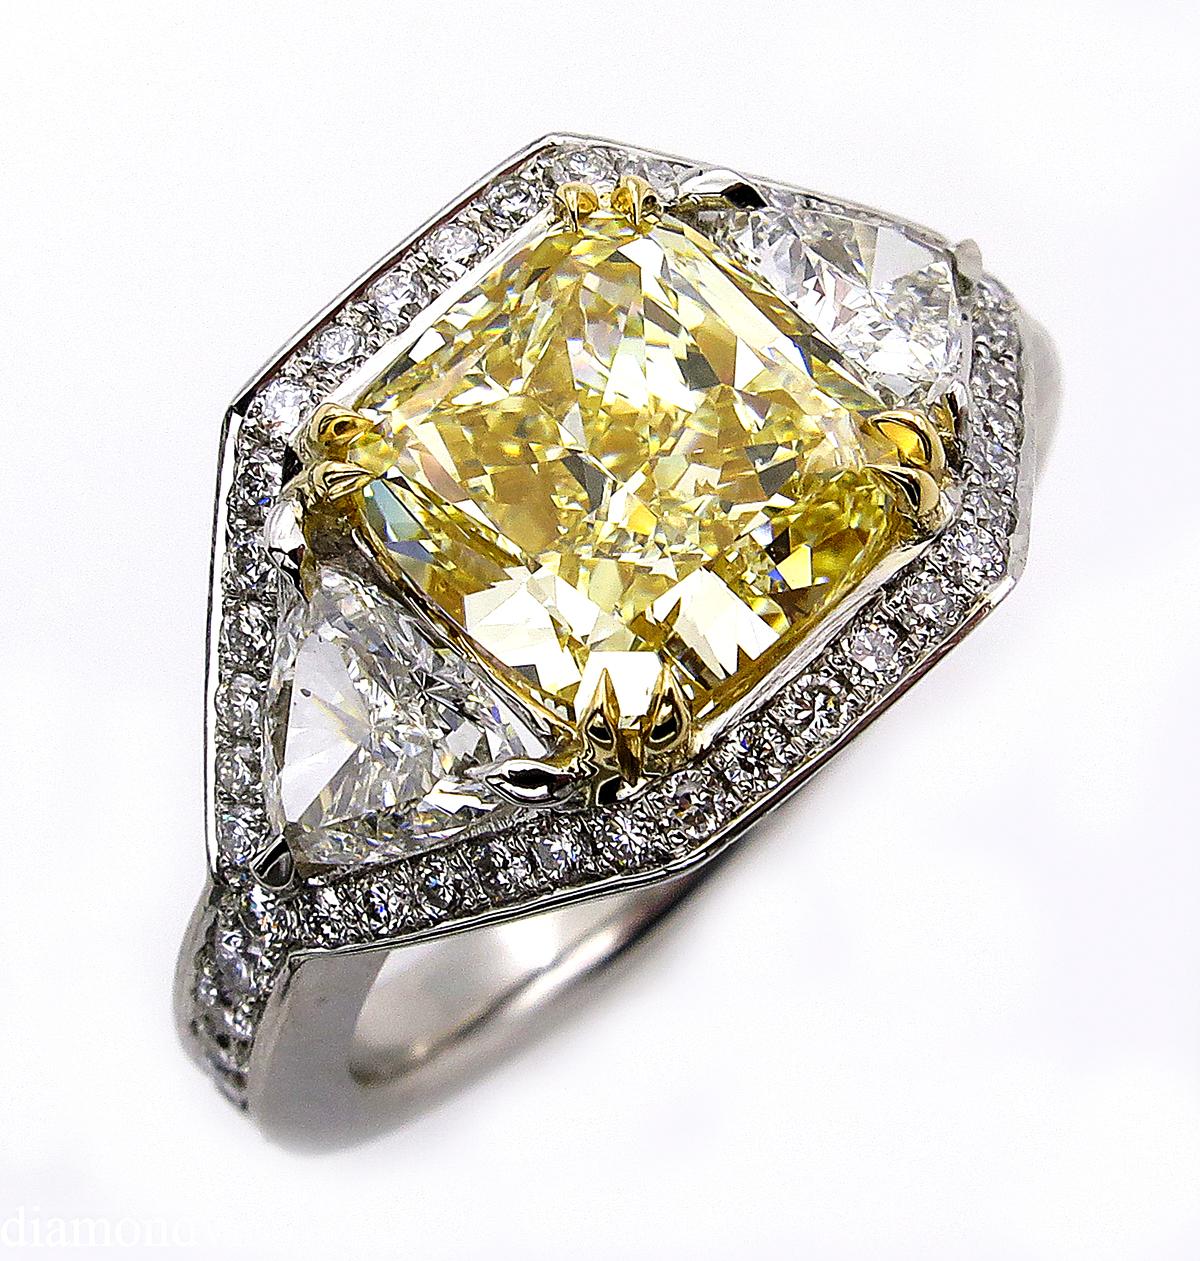 Gorgeous Estate Vintage Diamond Ring with 3.40ct CUSHION Brilliant Center Diamond GIA Certified NATURAL FANCY Light YELLOW Color, VS1 clarity (VERY clear). Beautiful Color, super Brilliant, appears FANCY Yellow, EVEN color distribution! The